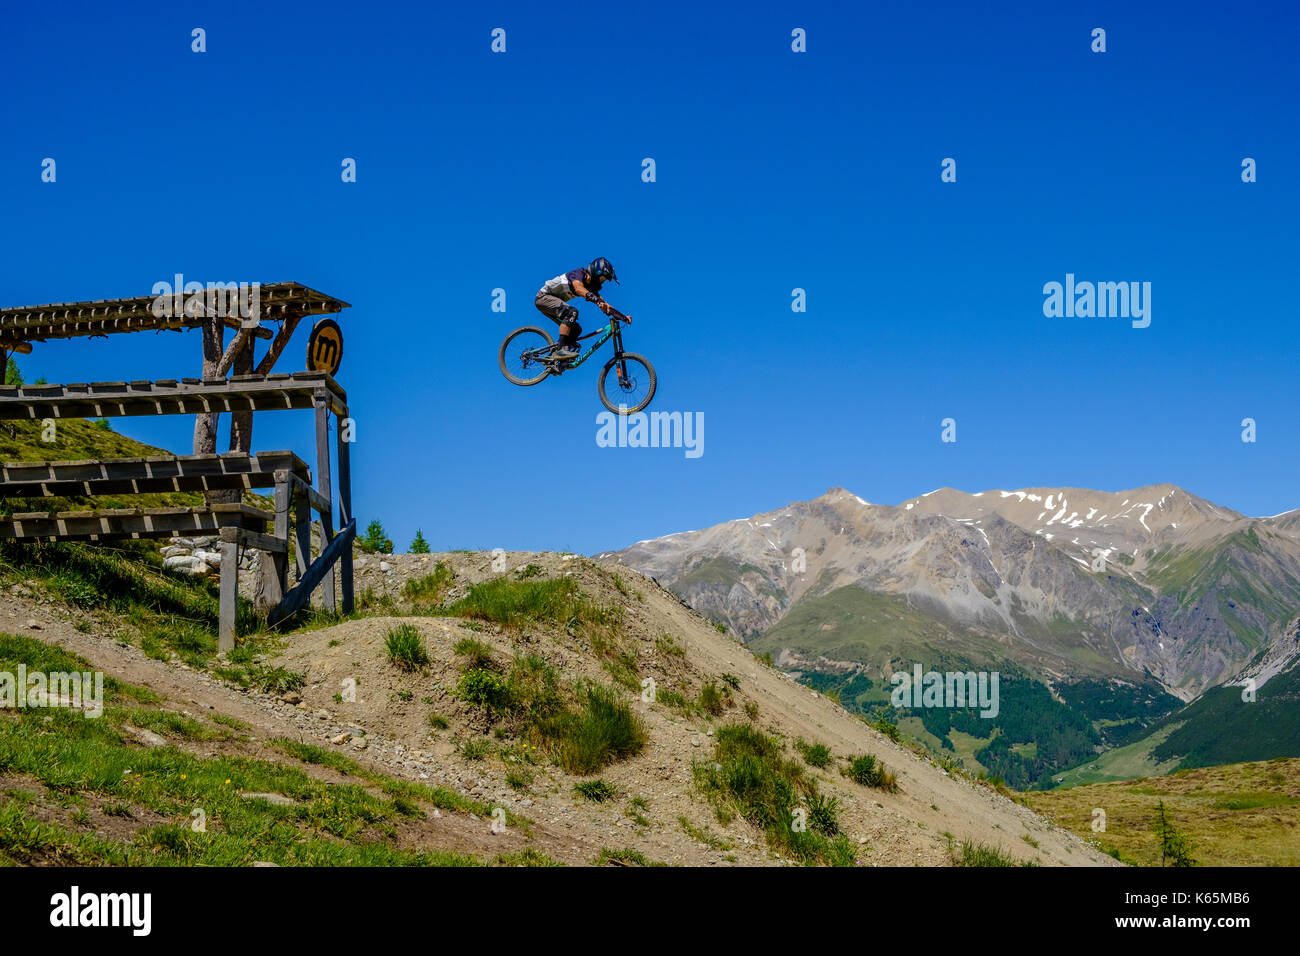 Downhill cyclist in action jumping down from a platform in the Motolino Bike Park Stock Photo